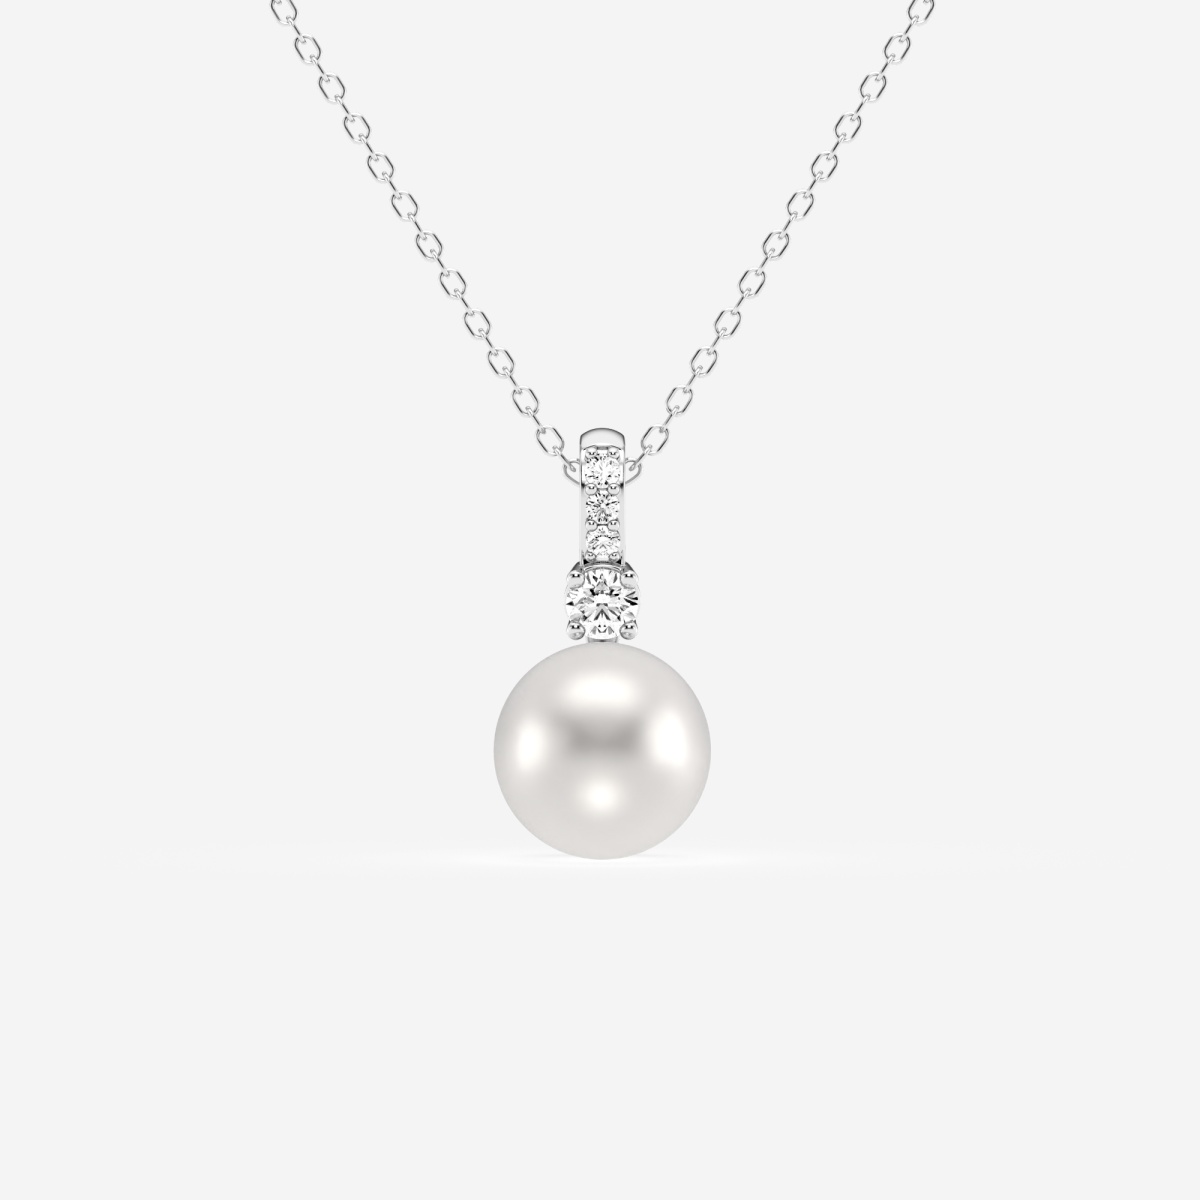 7.5 - 8.0 mm Cultured Freshwater Pearl and Lab Grown Diamond Accent Single Bail Fashion Pendant